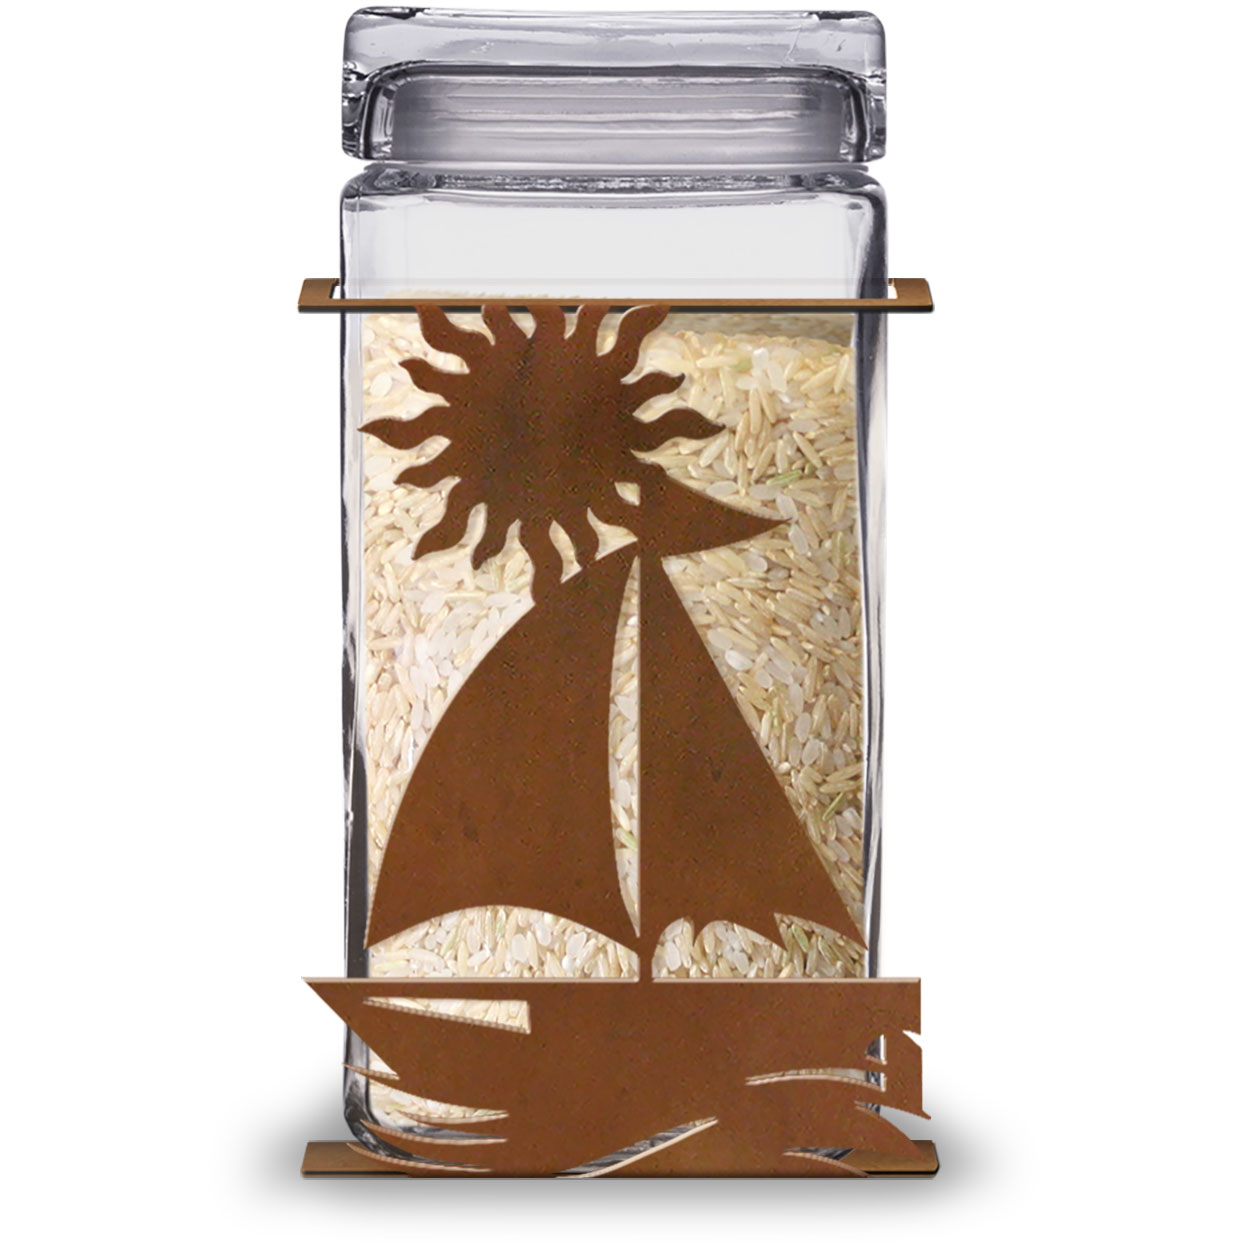 620043R - Sailboat 2-Quart Glass and Metal Canister in Rust Patina